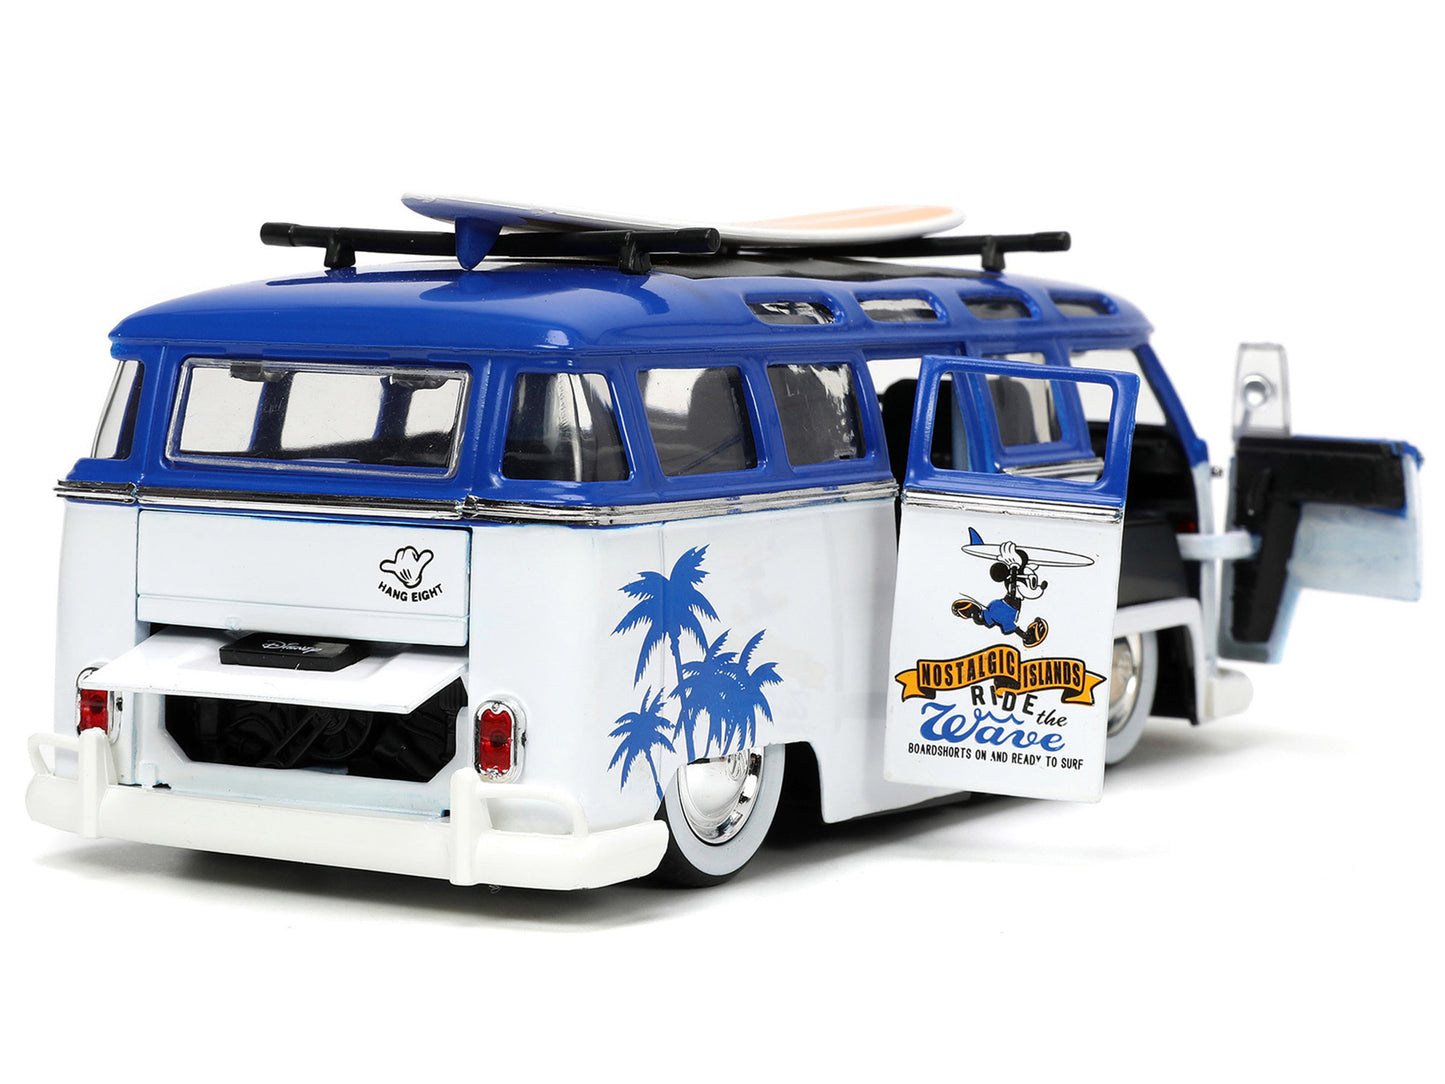 Volkswagen T1 Bus Blue and White with Graphics "Nostalgic Islands Ride the Wave" and Mickey Mouse Diecast Figure and Surfboard "Disney's Mickey and Friends" "Hollywood Rides" Series 1/24 Diecast Model Car by Jada